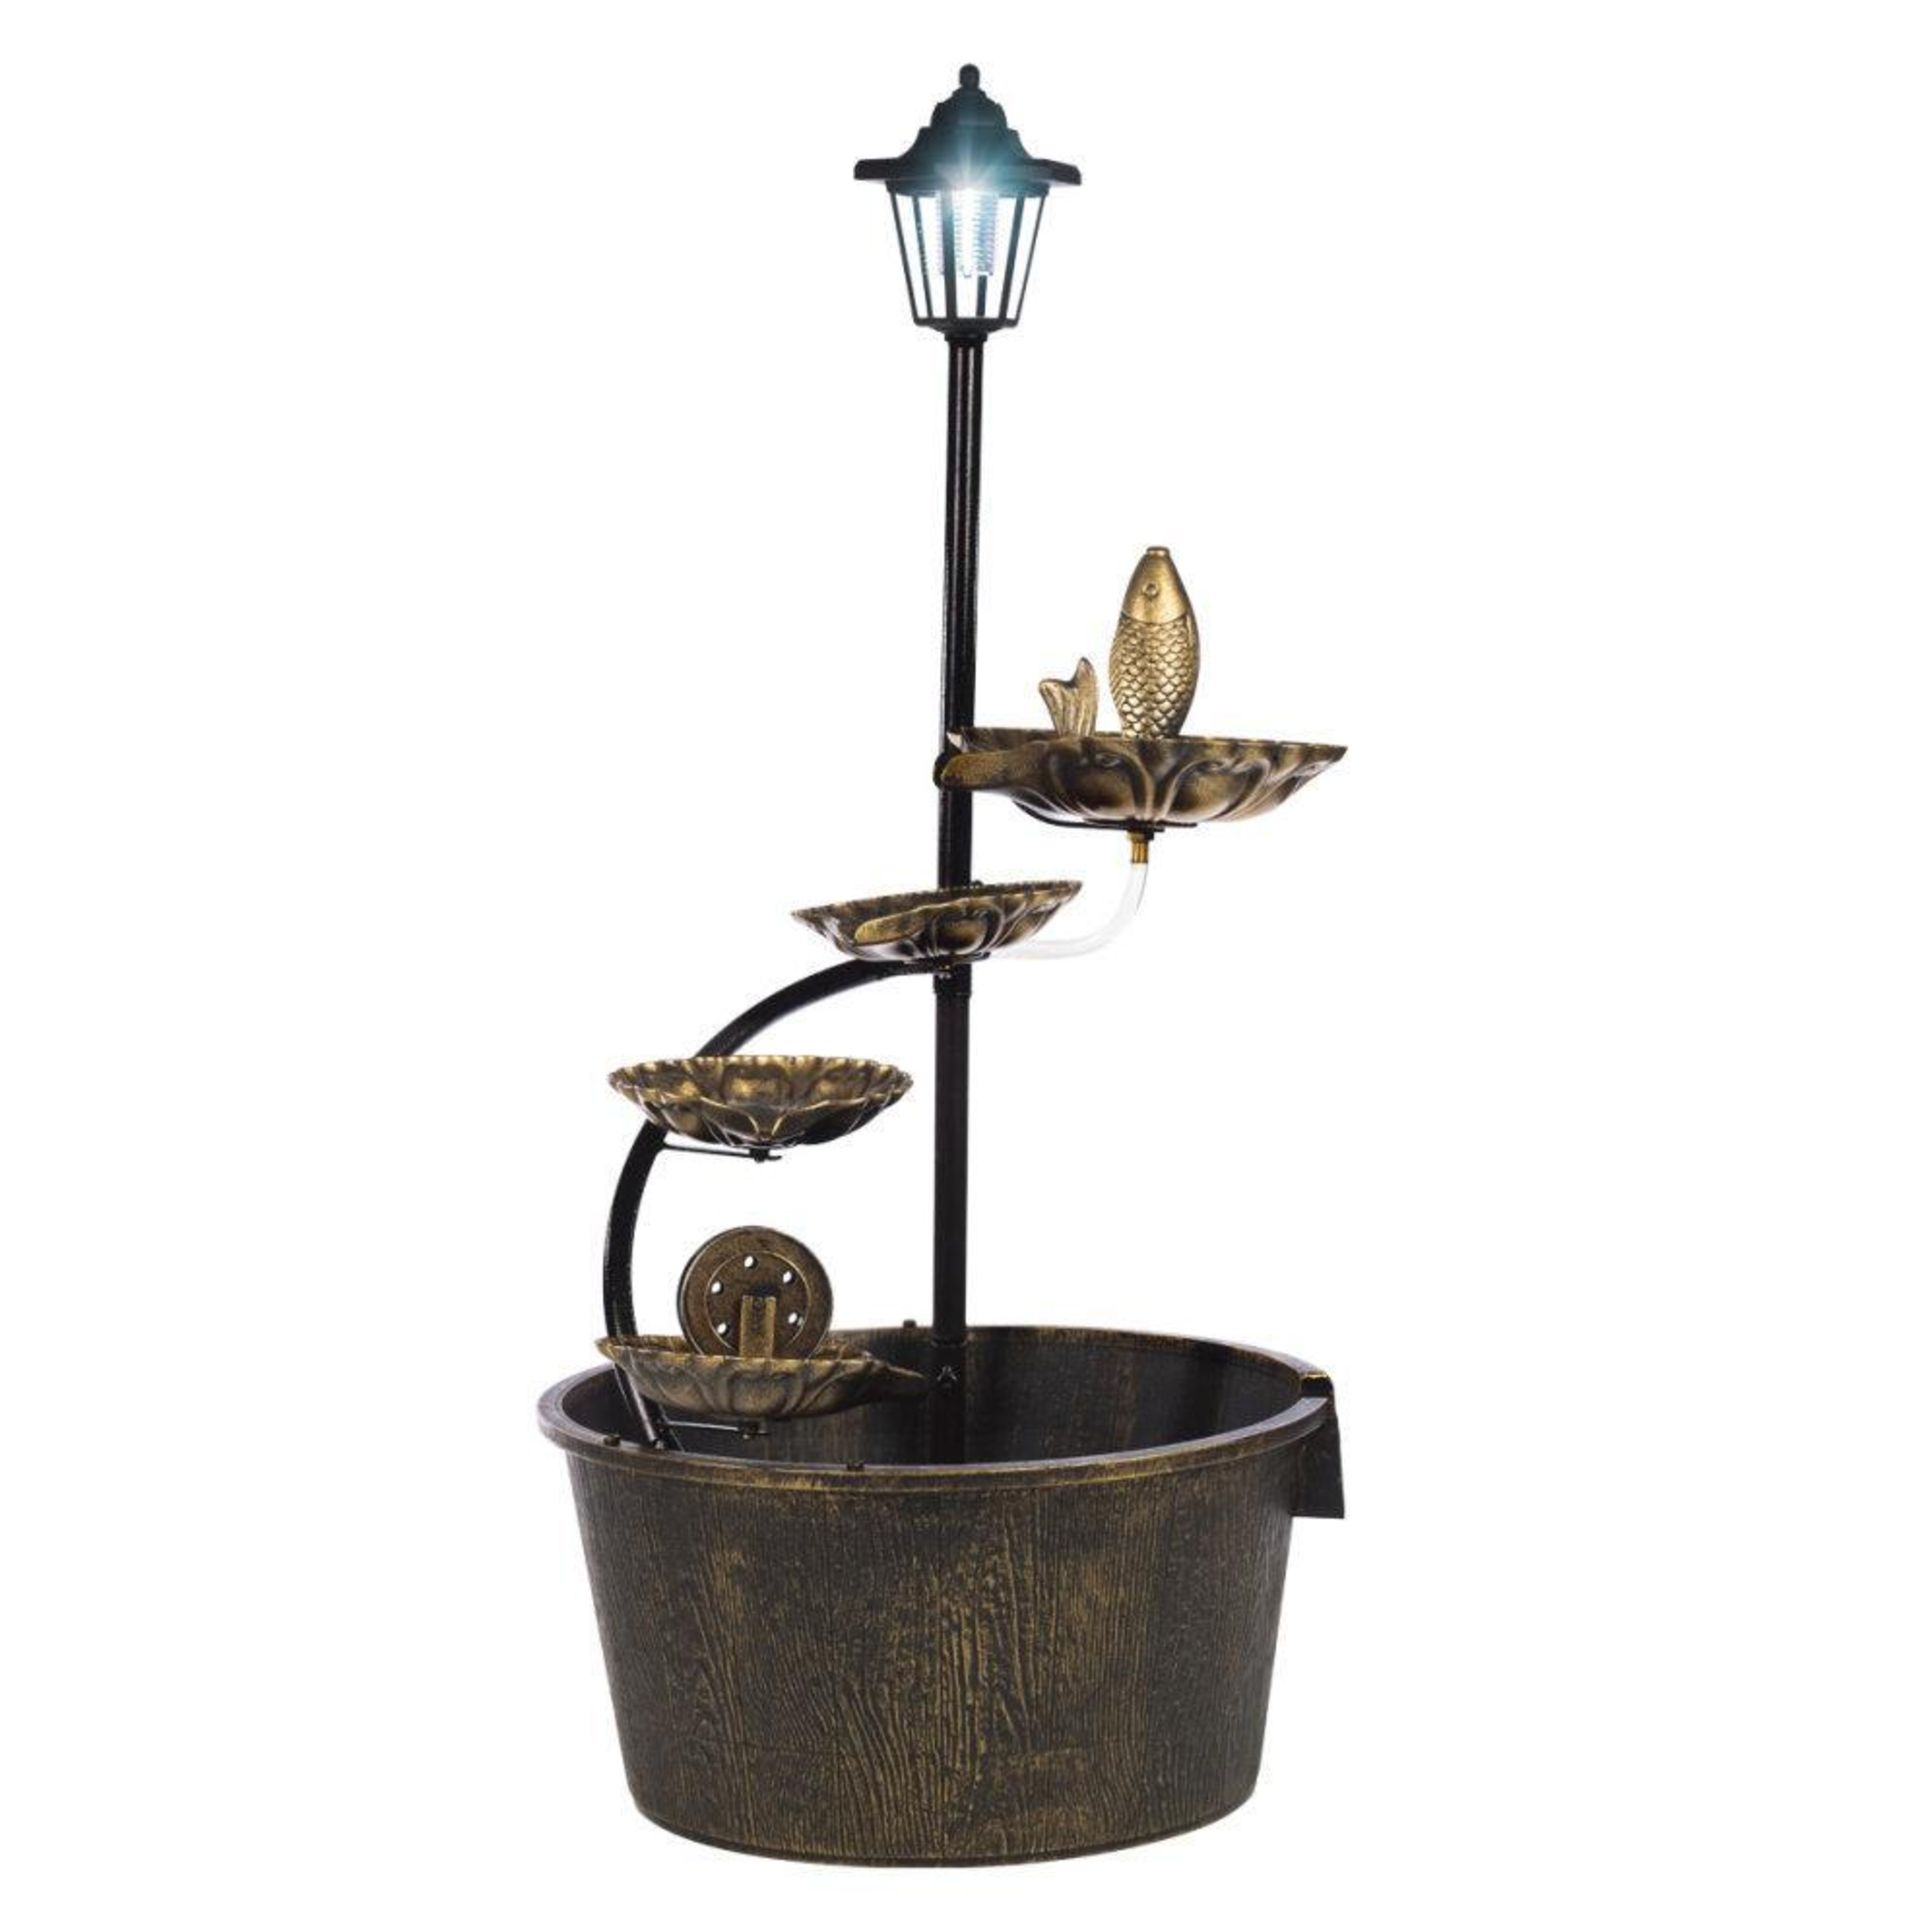 Gardenkraft Outdoor Cascading Fountain with 4 Lotus Leaves - Brown - AO. At 90cm high and 41cm in